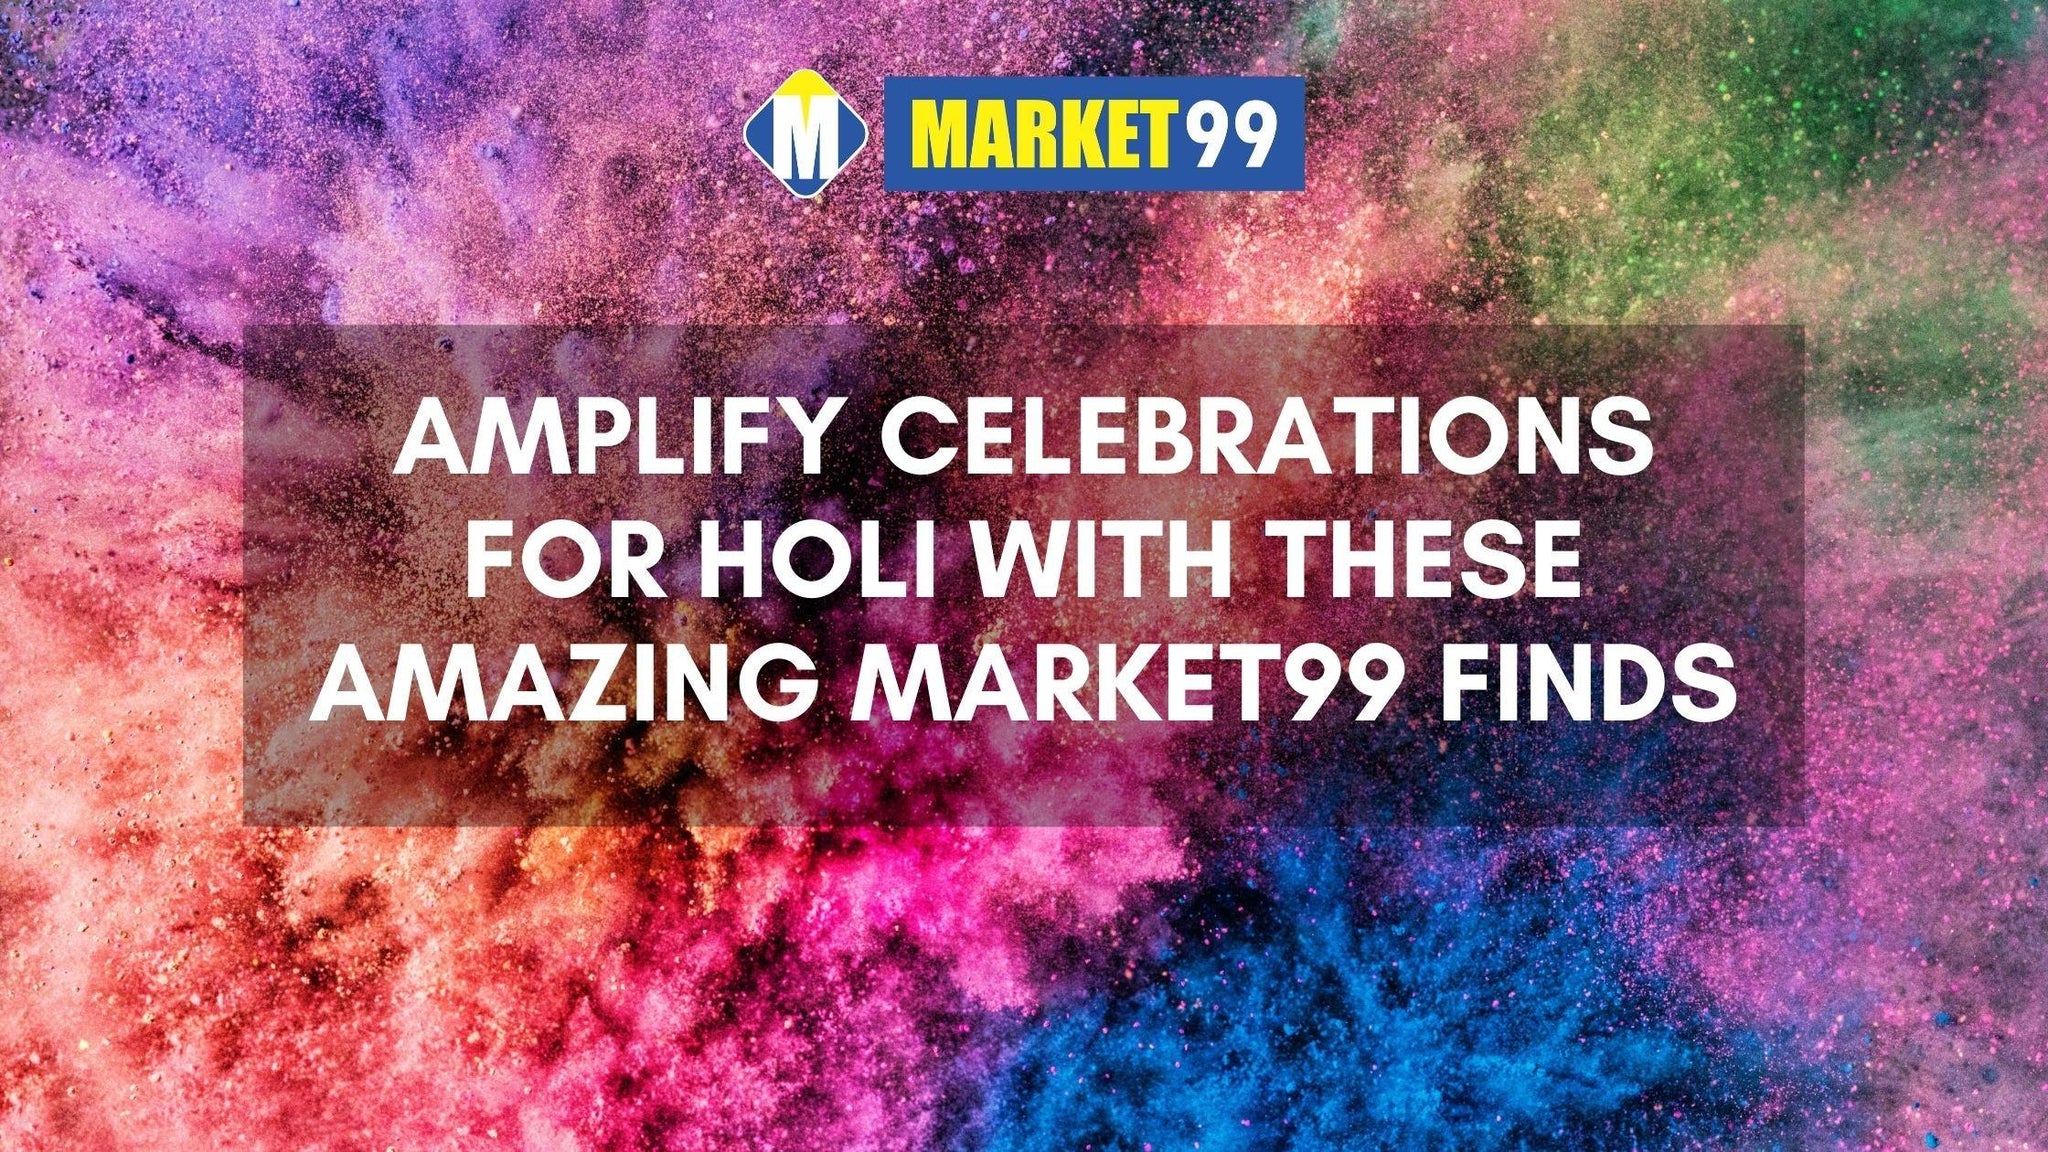 Amplify Celebrations For Holi with These Amazing Market99 Finds - MARKET 99